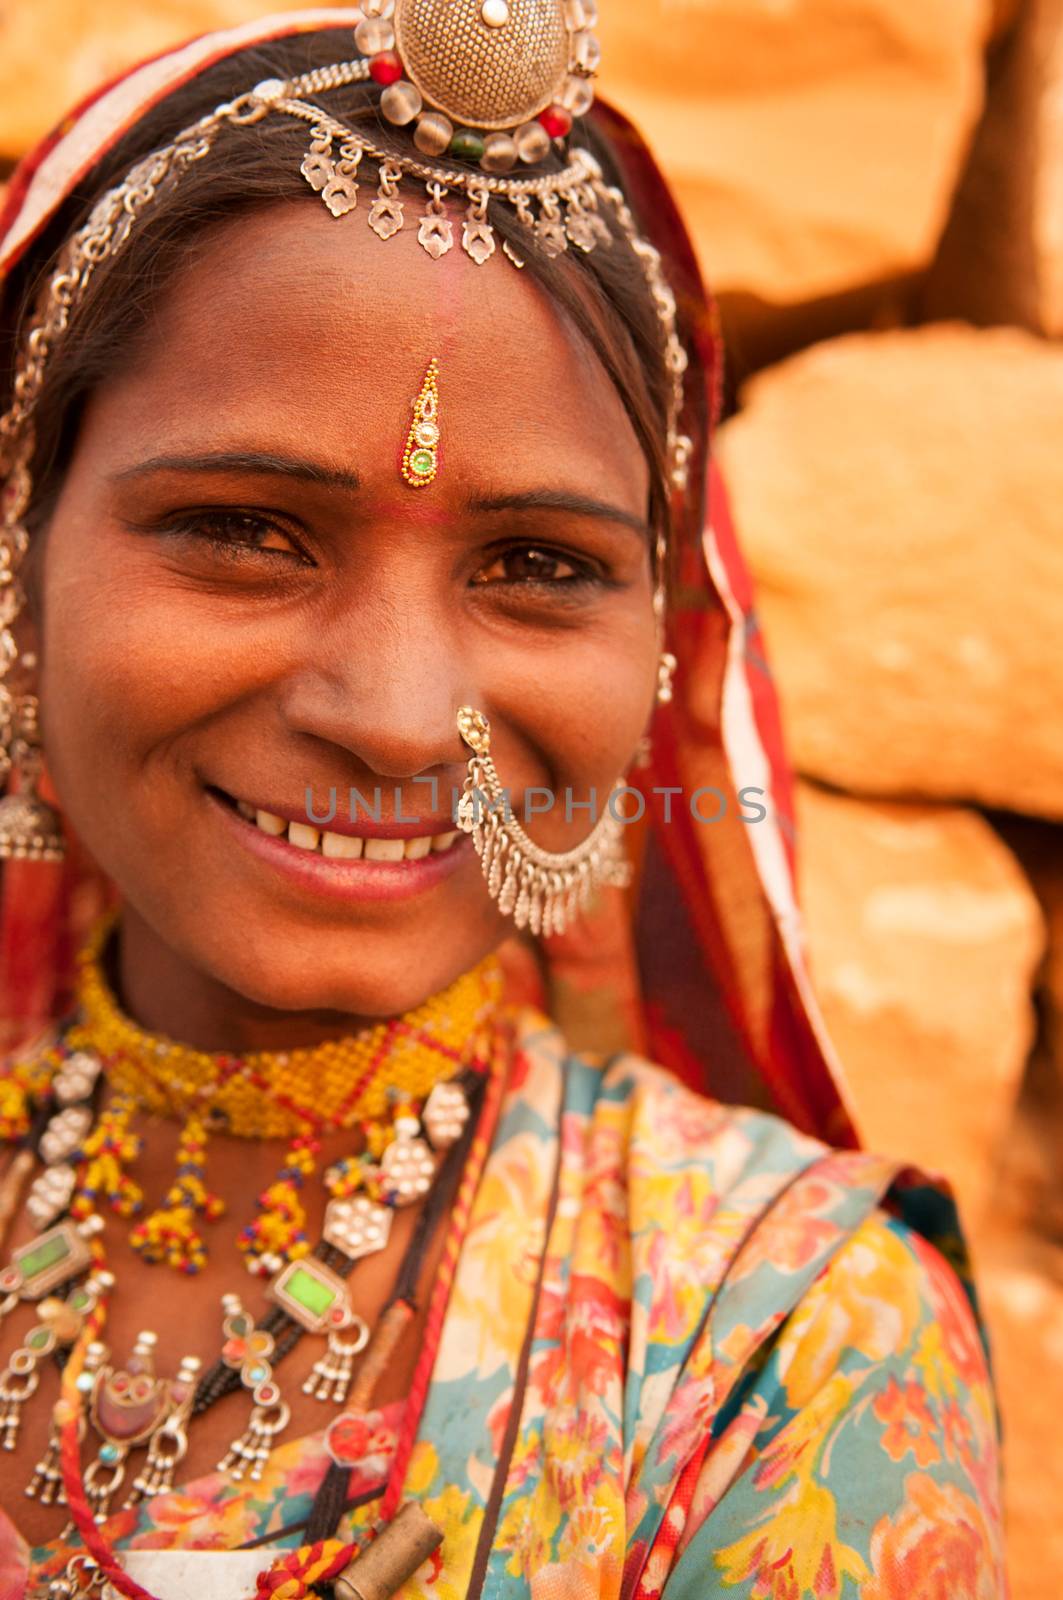 Portrait of smiling traditional Indian woman in sari dress, India people